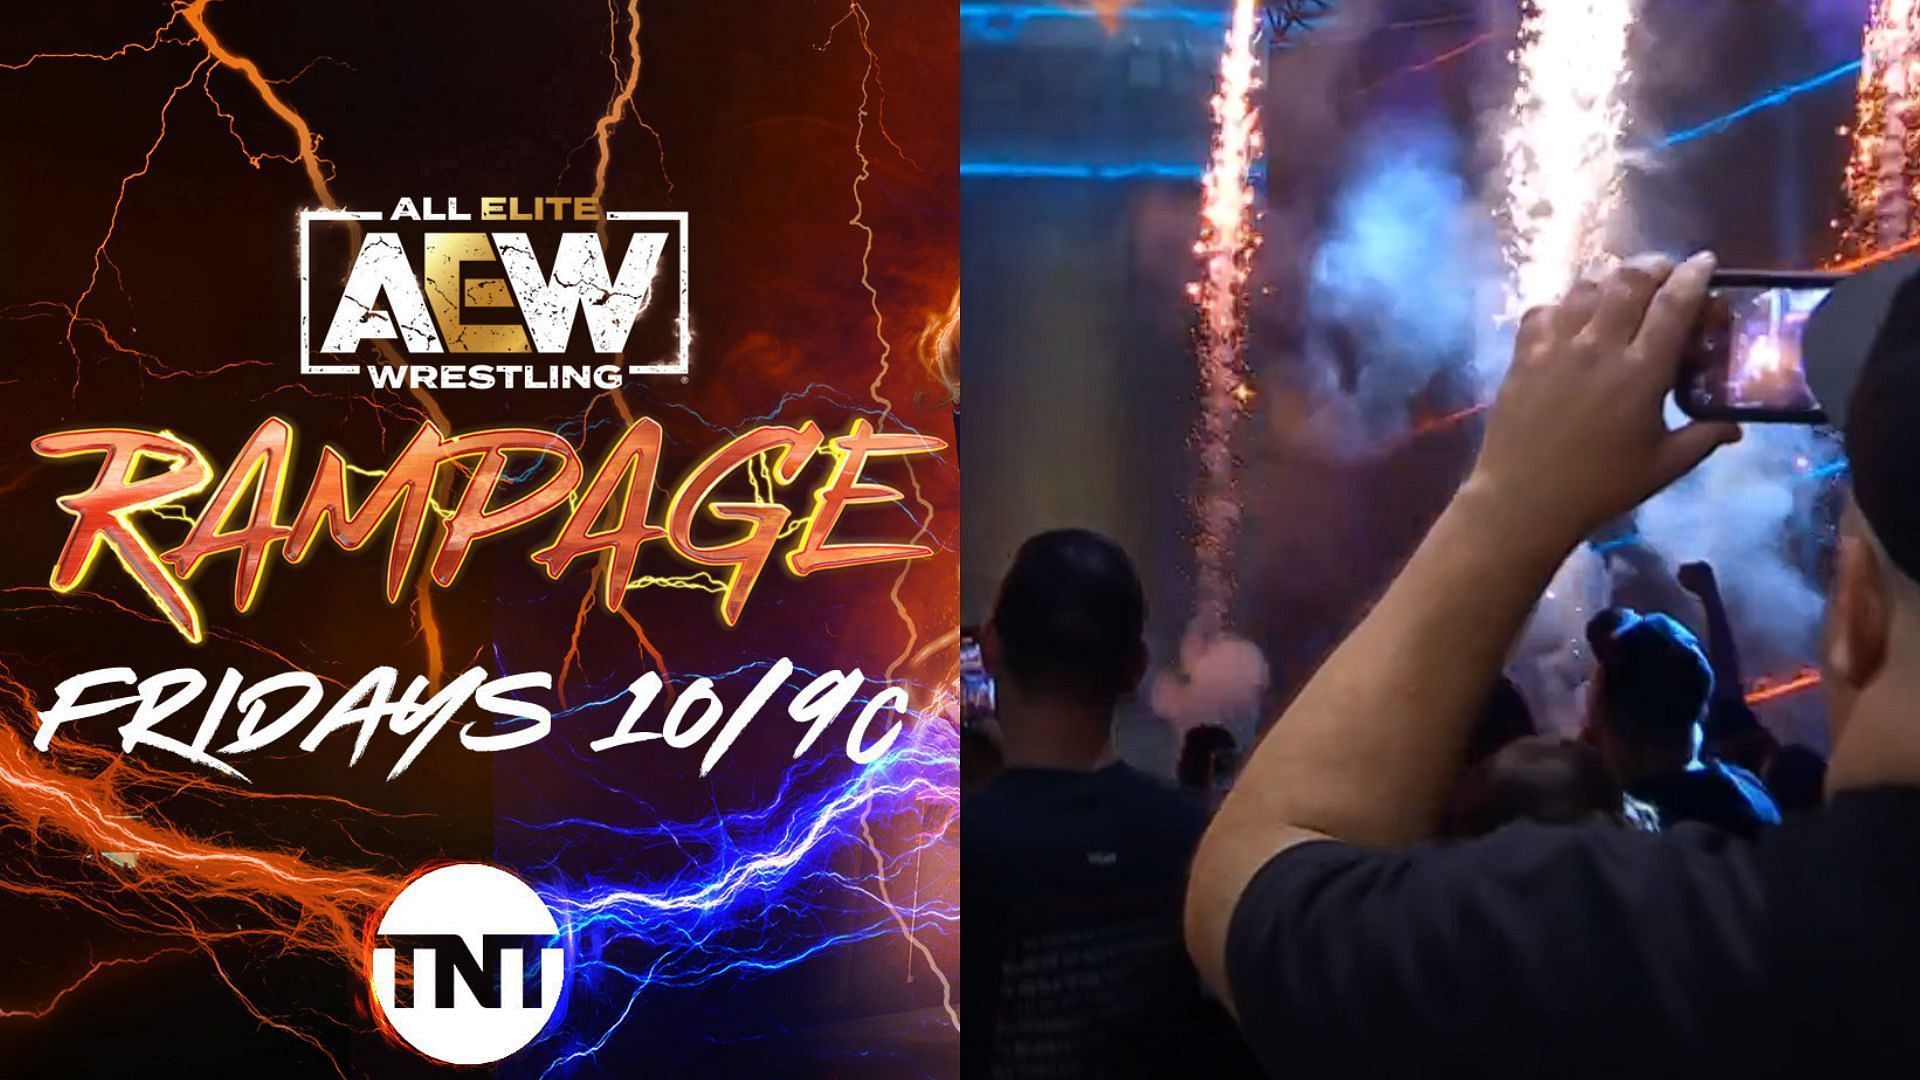 AEW Rampage is the weekly Friday show of All Elite Wrestling [Photo courtesy of AEW